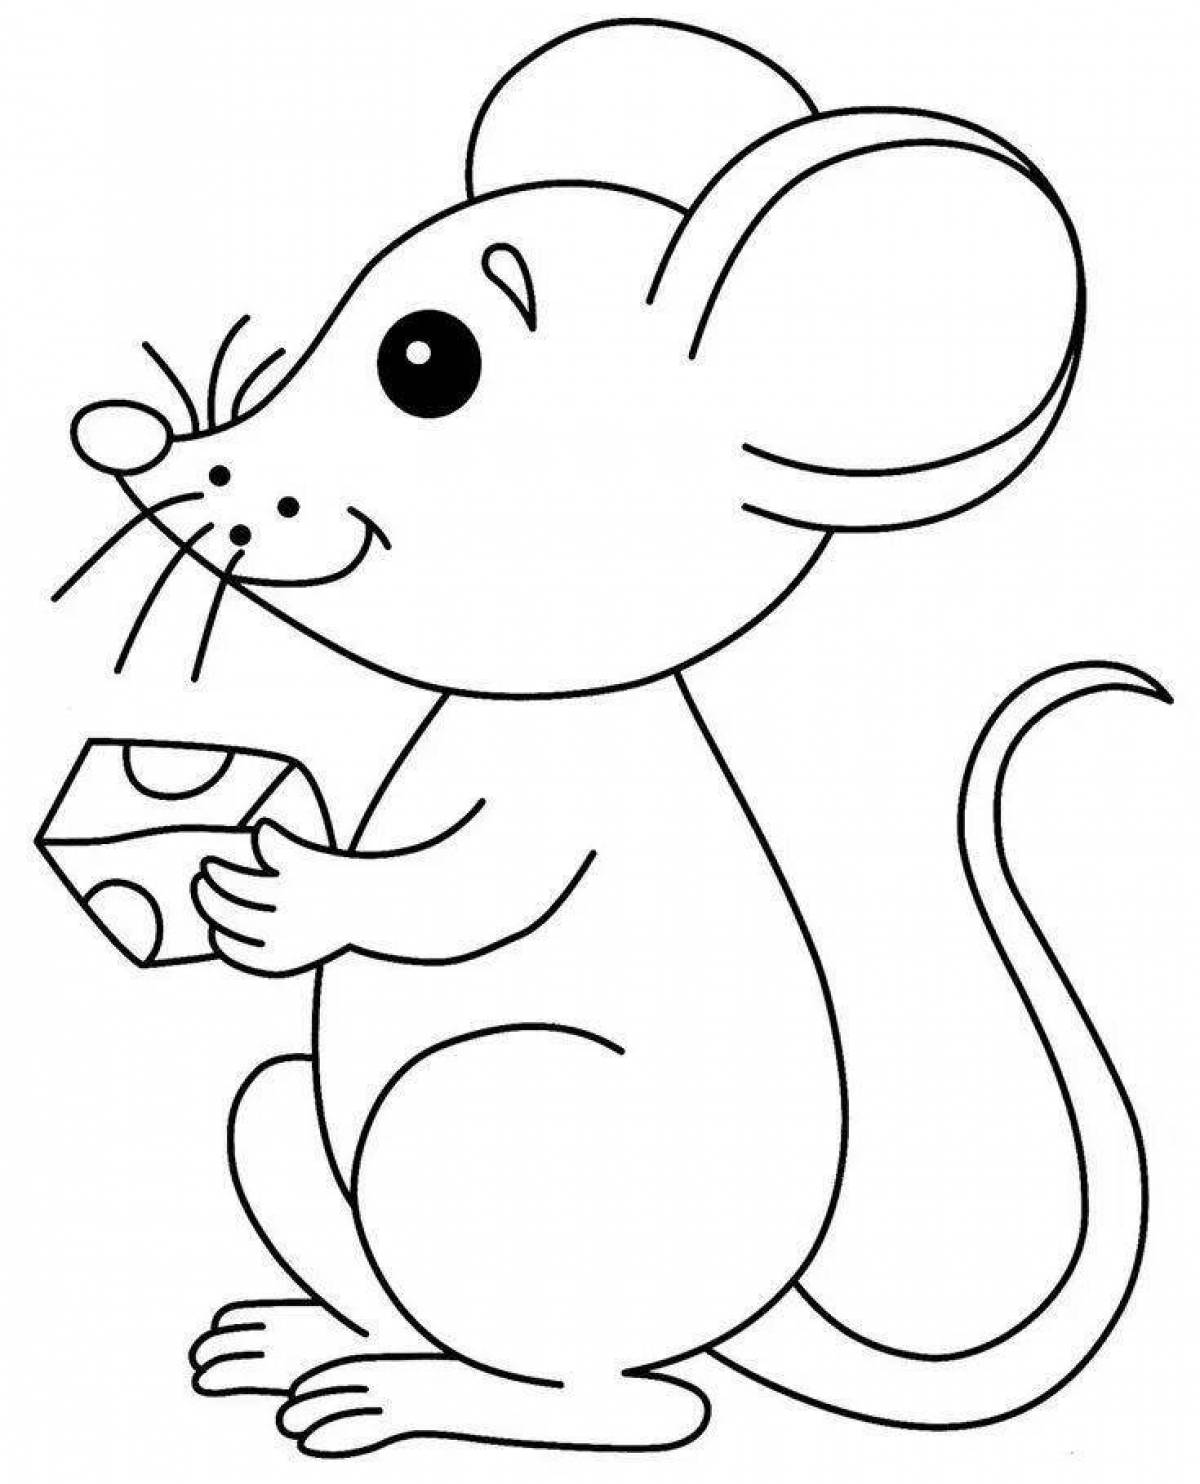 Coloring page adorable mouse tim